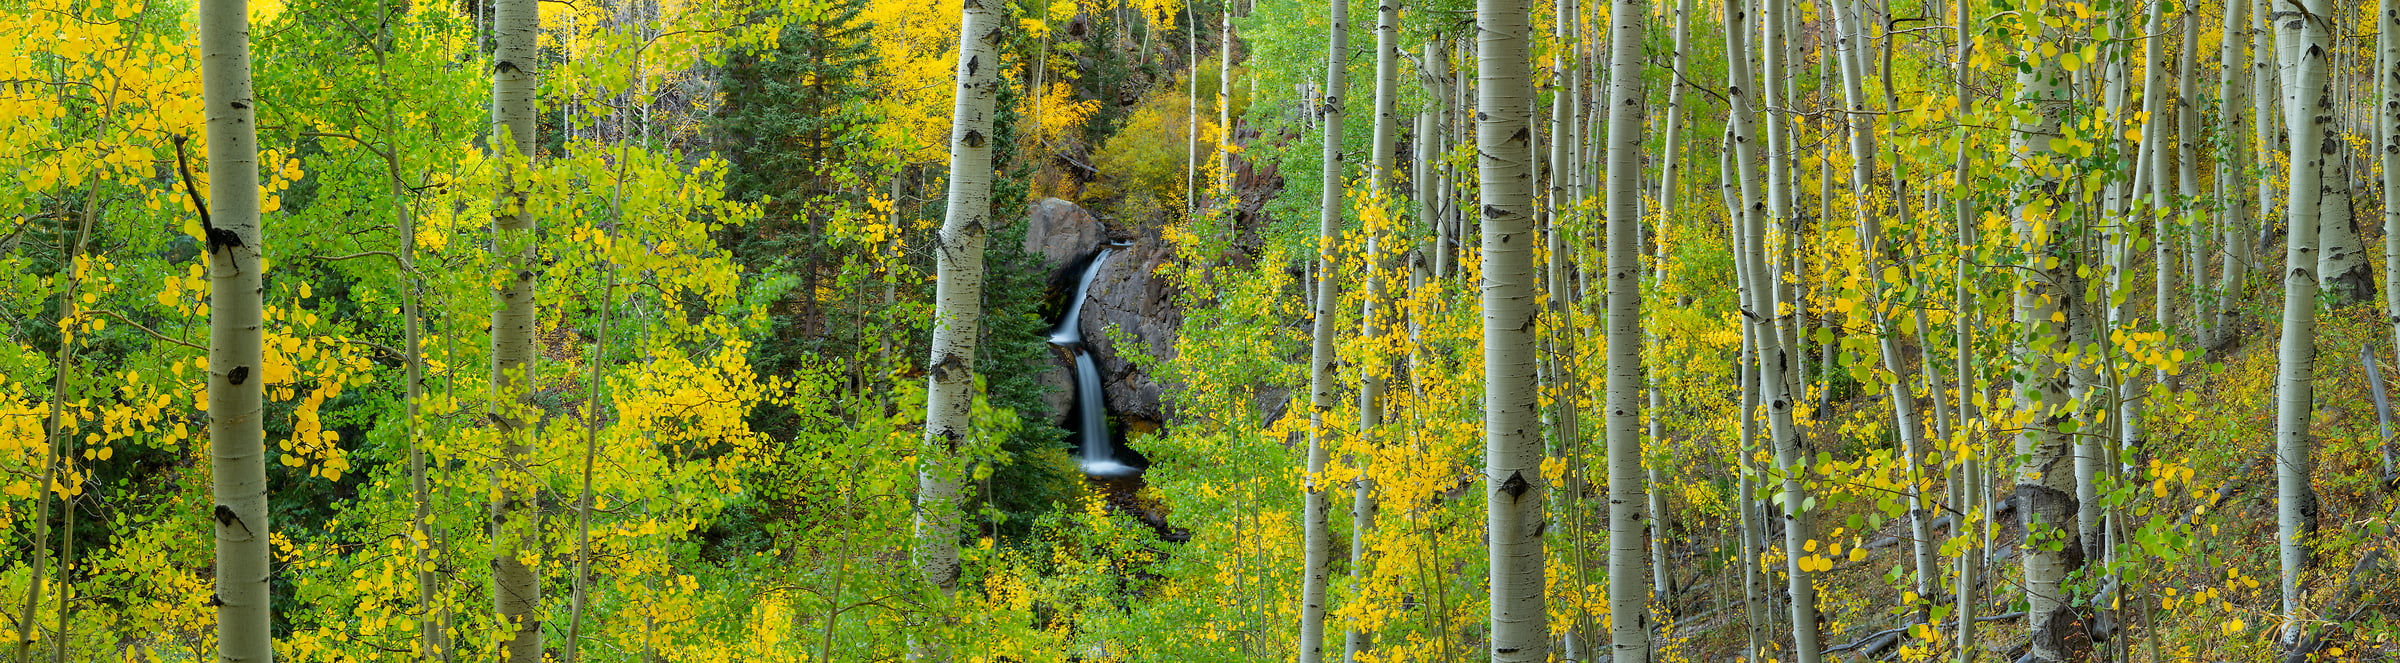 203 megapixels! A very high resolution, panoramic photo print of a nature scene with birch trees, a forest, and a waterfall; photograph created by Phillip Noll in Lake City, Colorado.